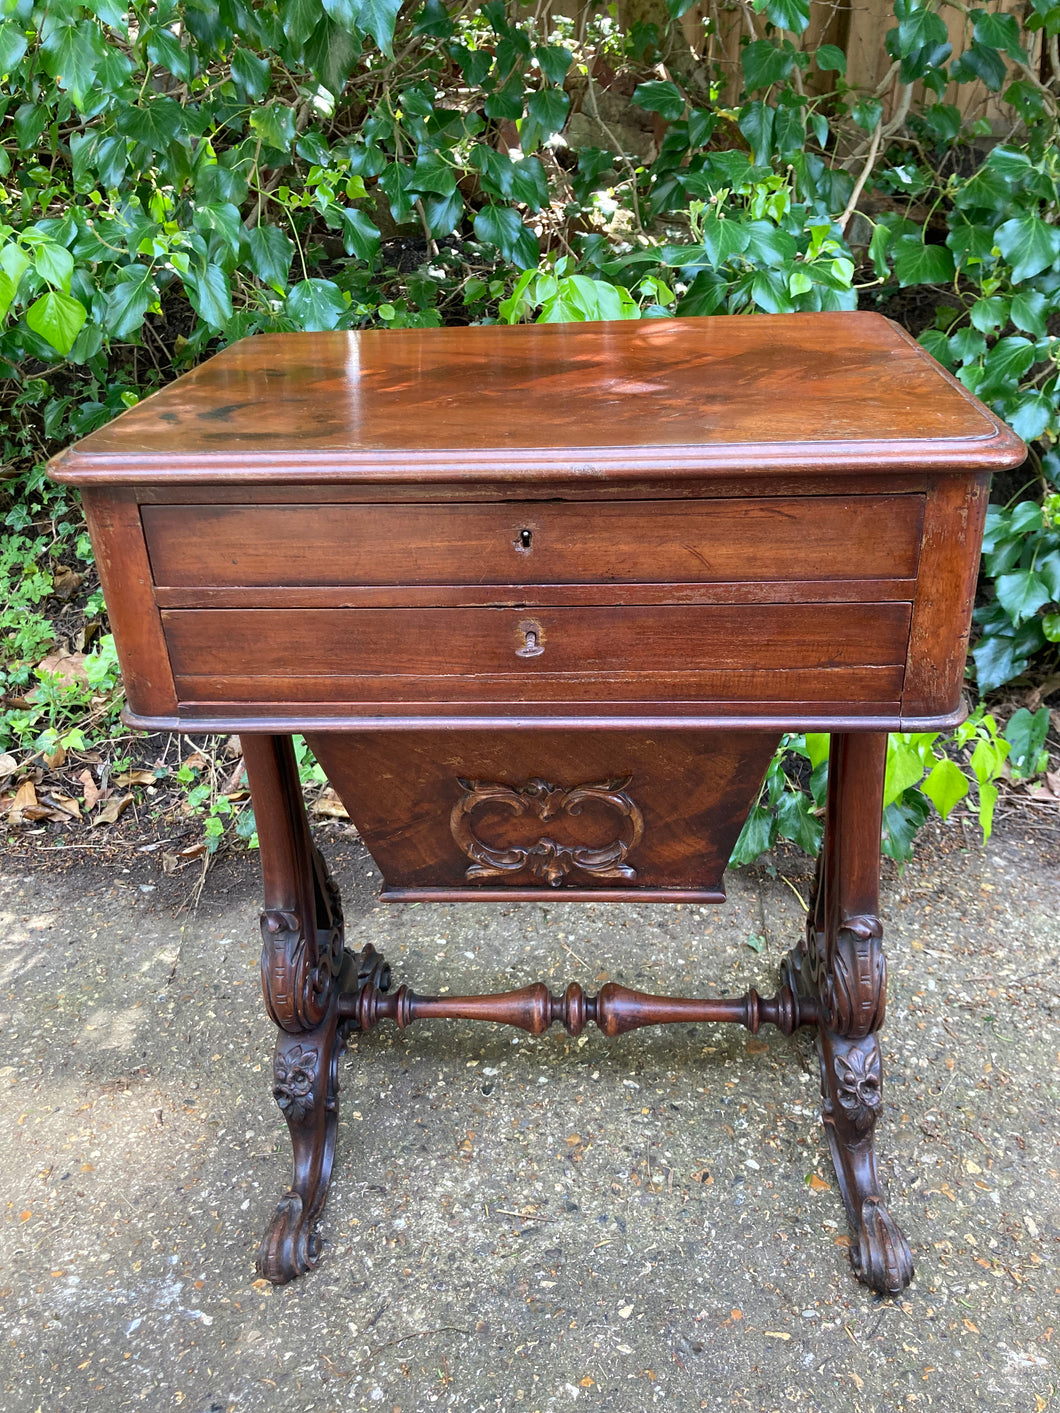 Antique Mahogany Sewing Table Three Drawers With Lock And Key